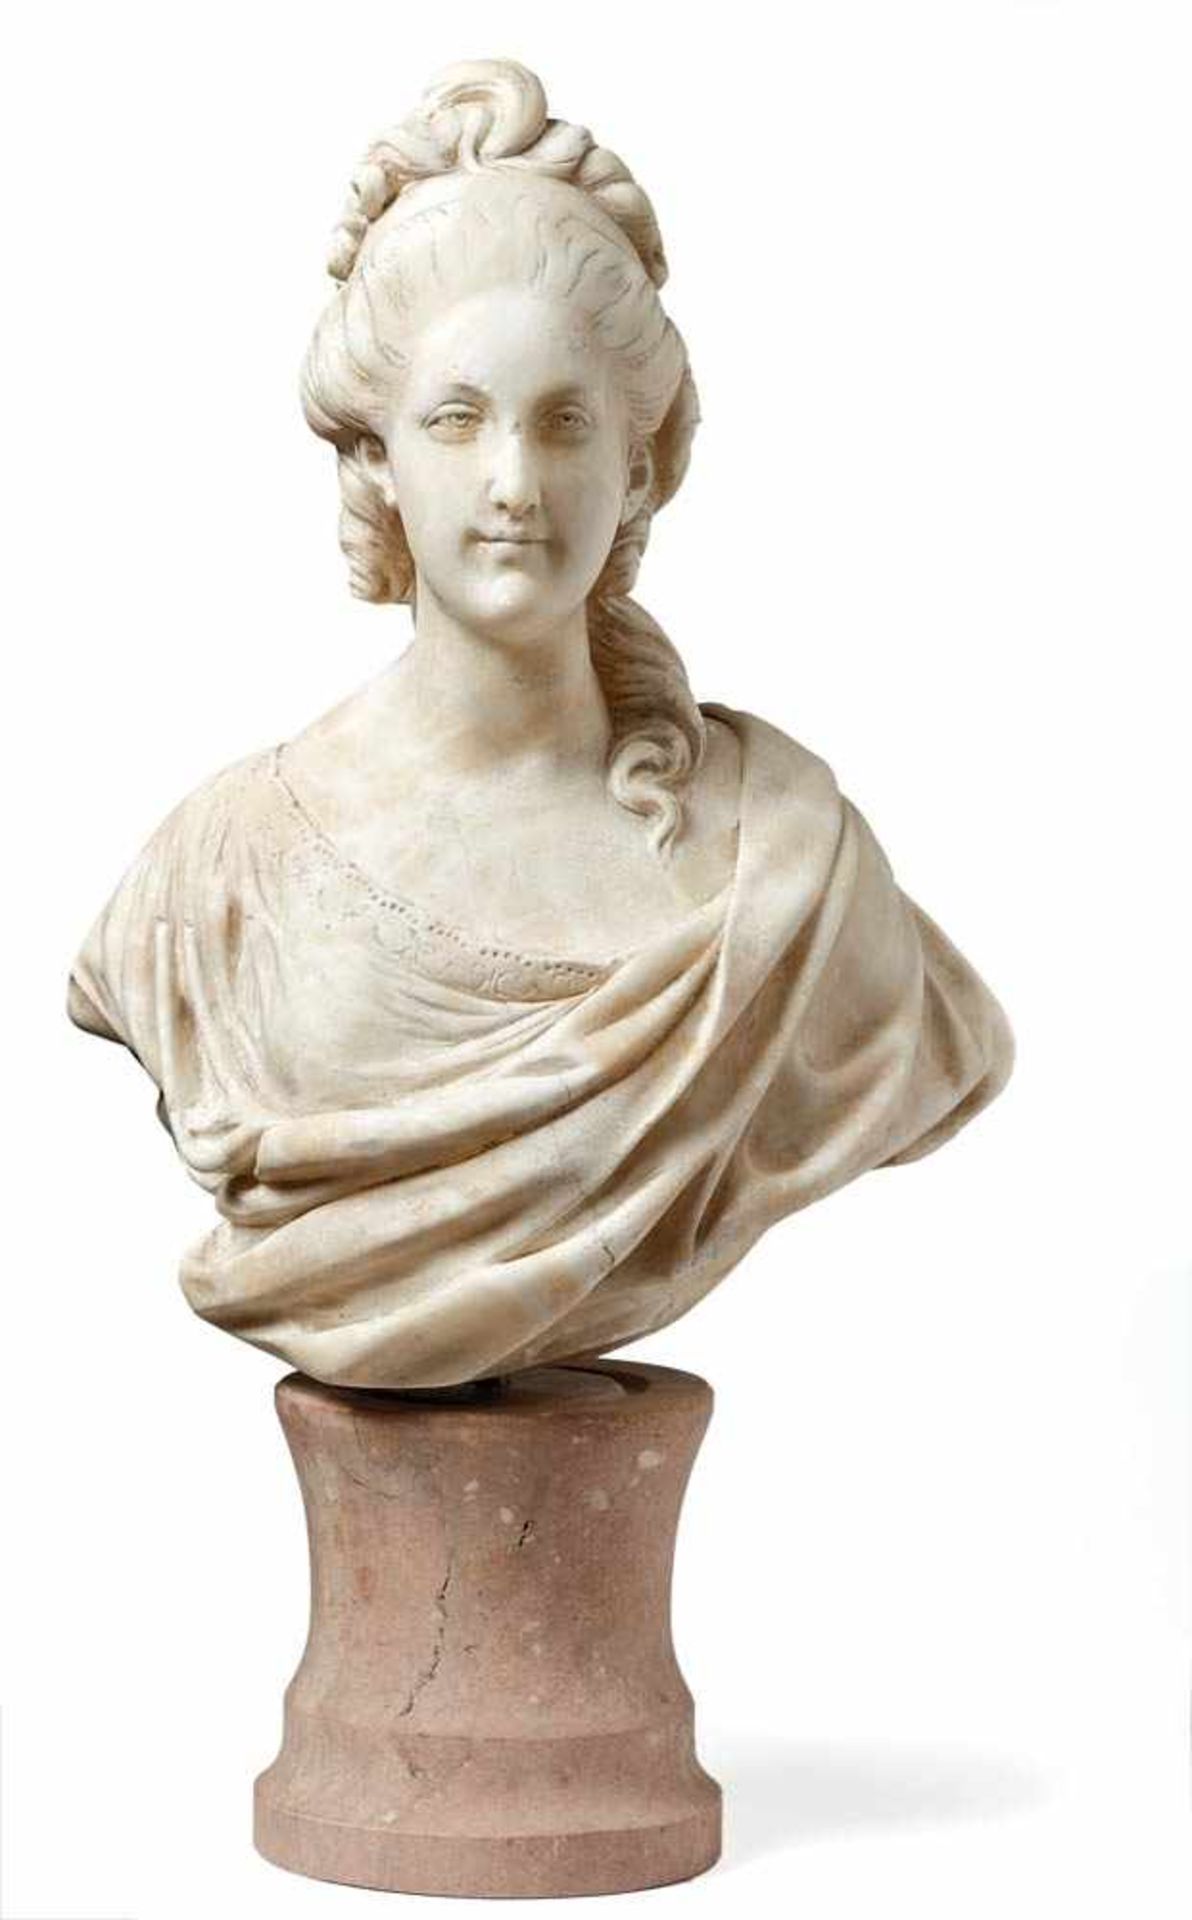 Labatut, Jules JaquesBust(1851-1935) On a profiled pedestal, bust of a noble lady in a garment